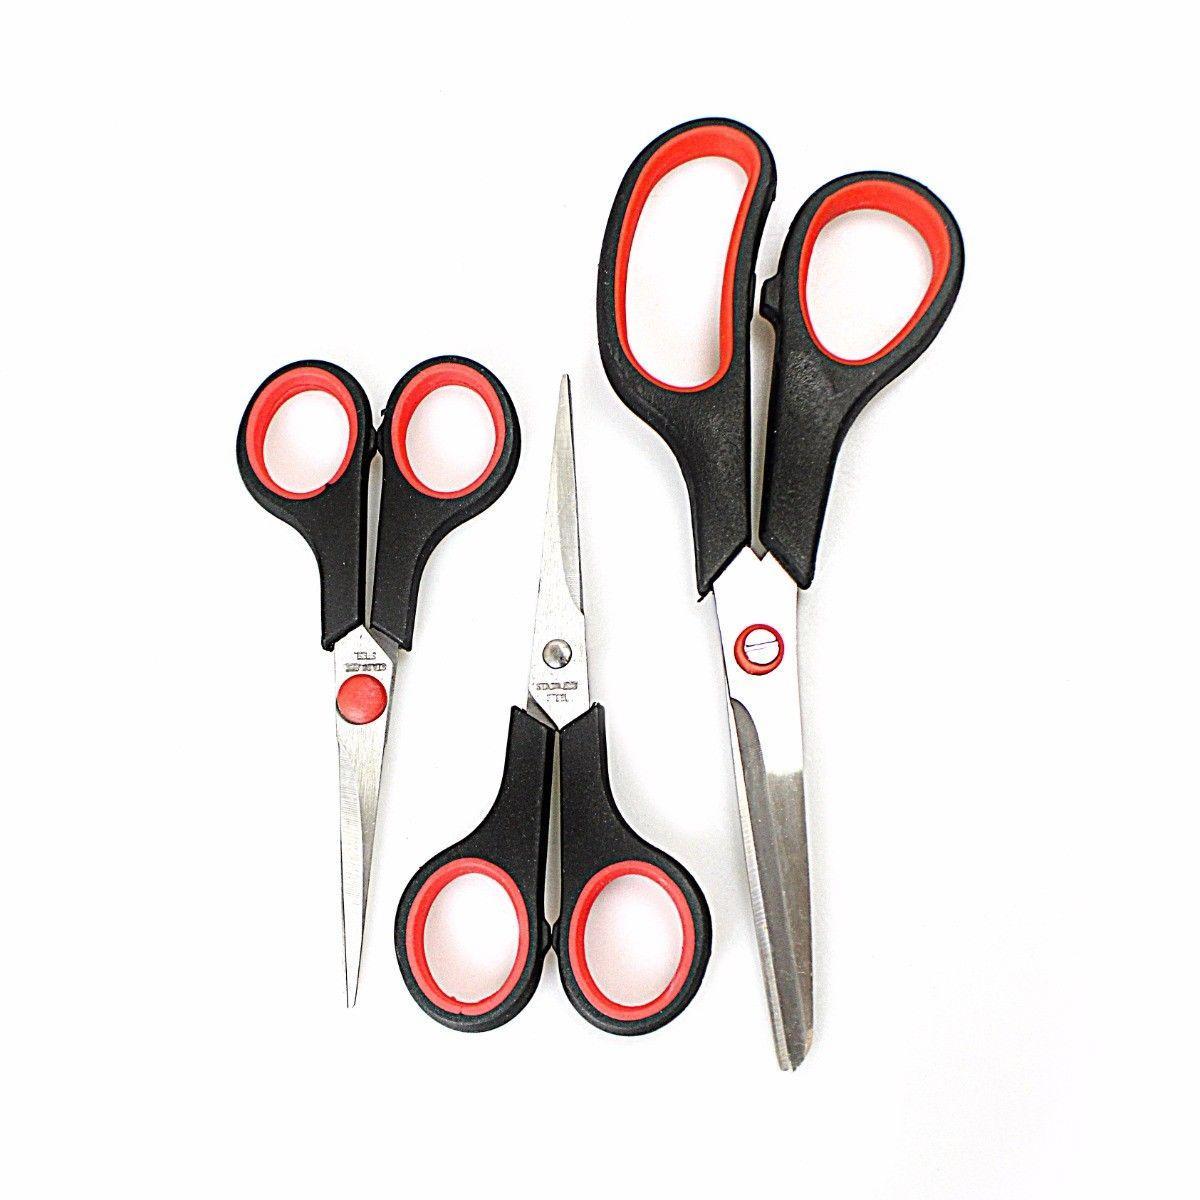 Stainless Steel Household Scissors Pack of 3 0351 (Parcel Rate)